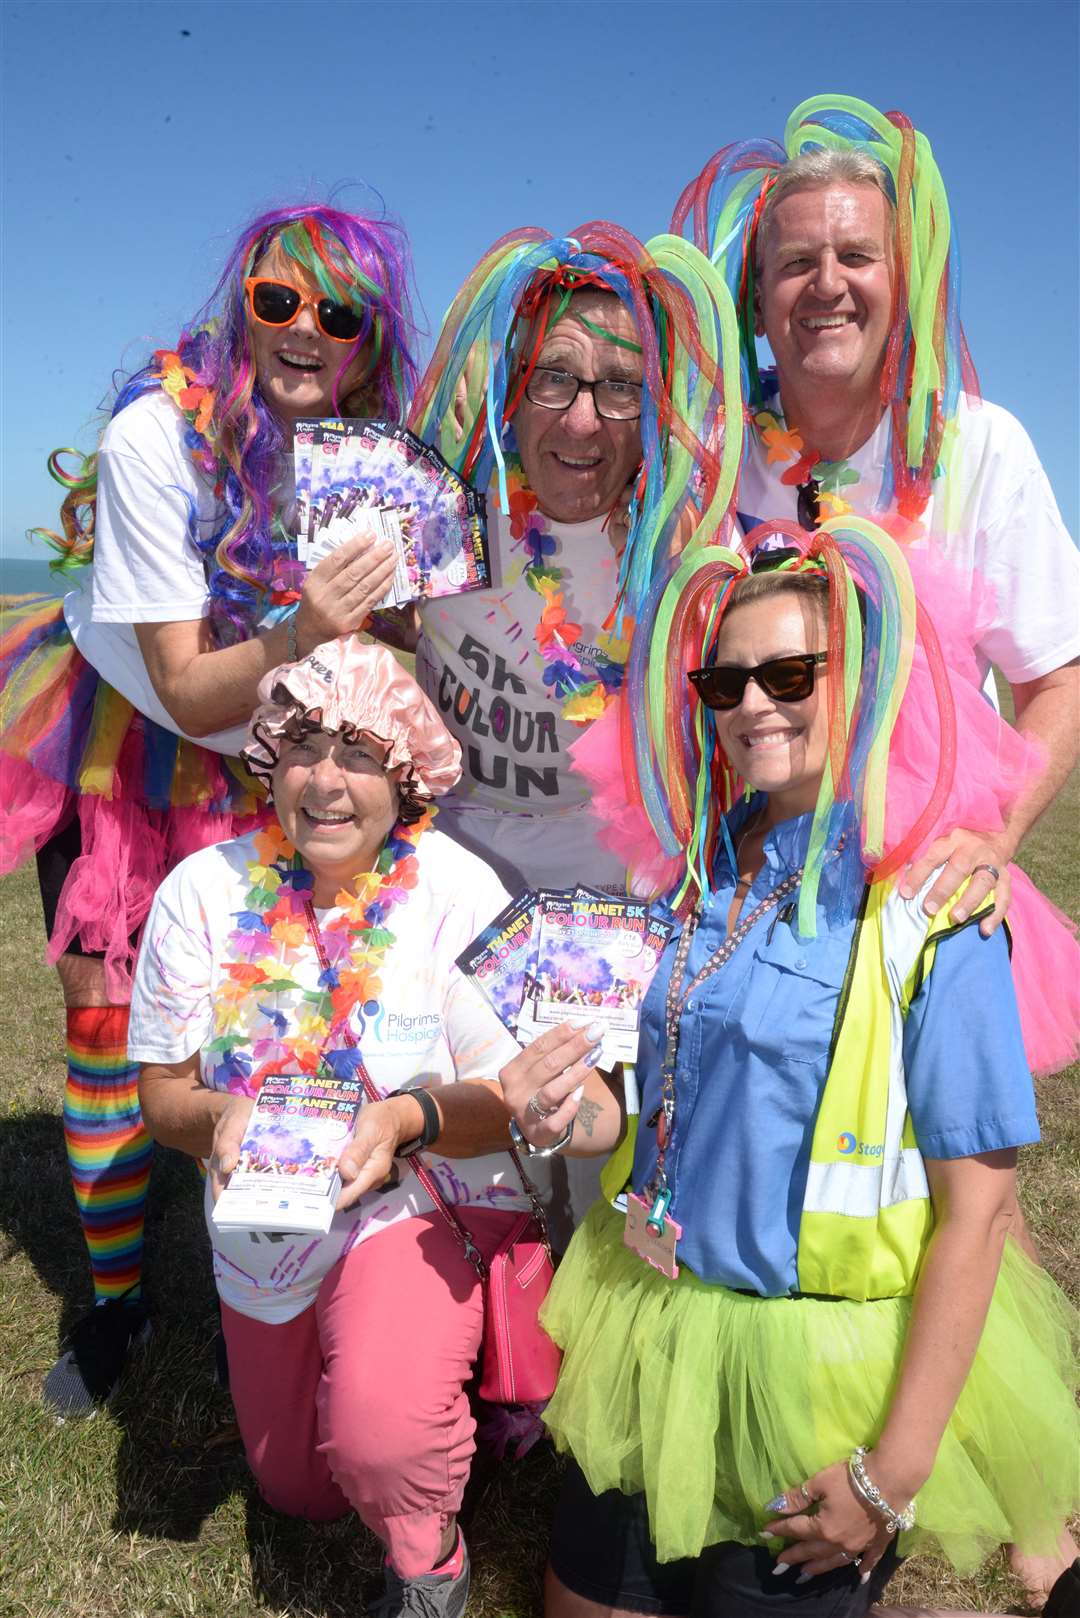 The team from the Pilgrims Hospices at the Margate Carnival on Sunday. Picture: Chris Davey. (3437135)